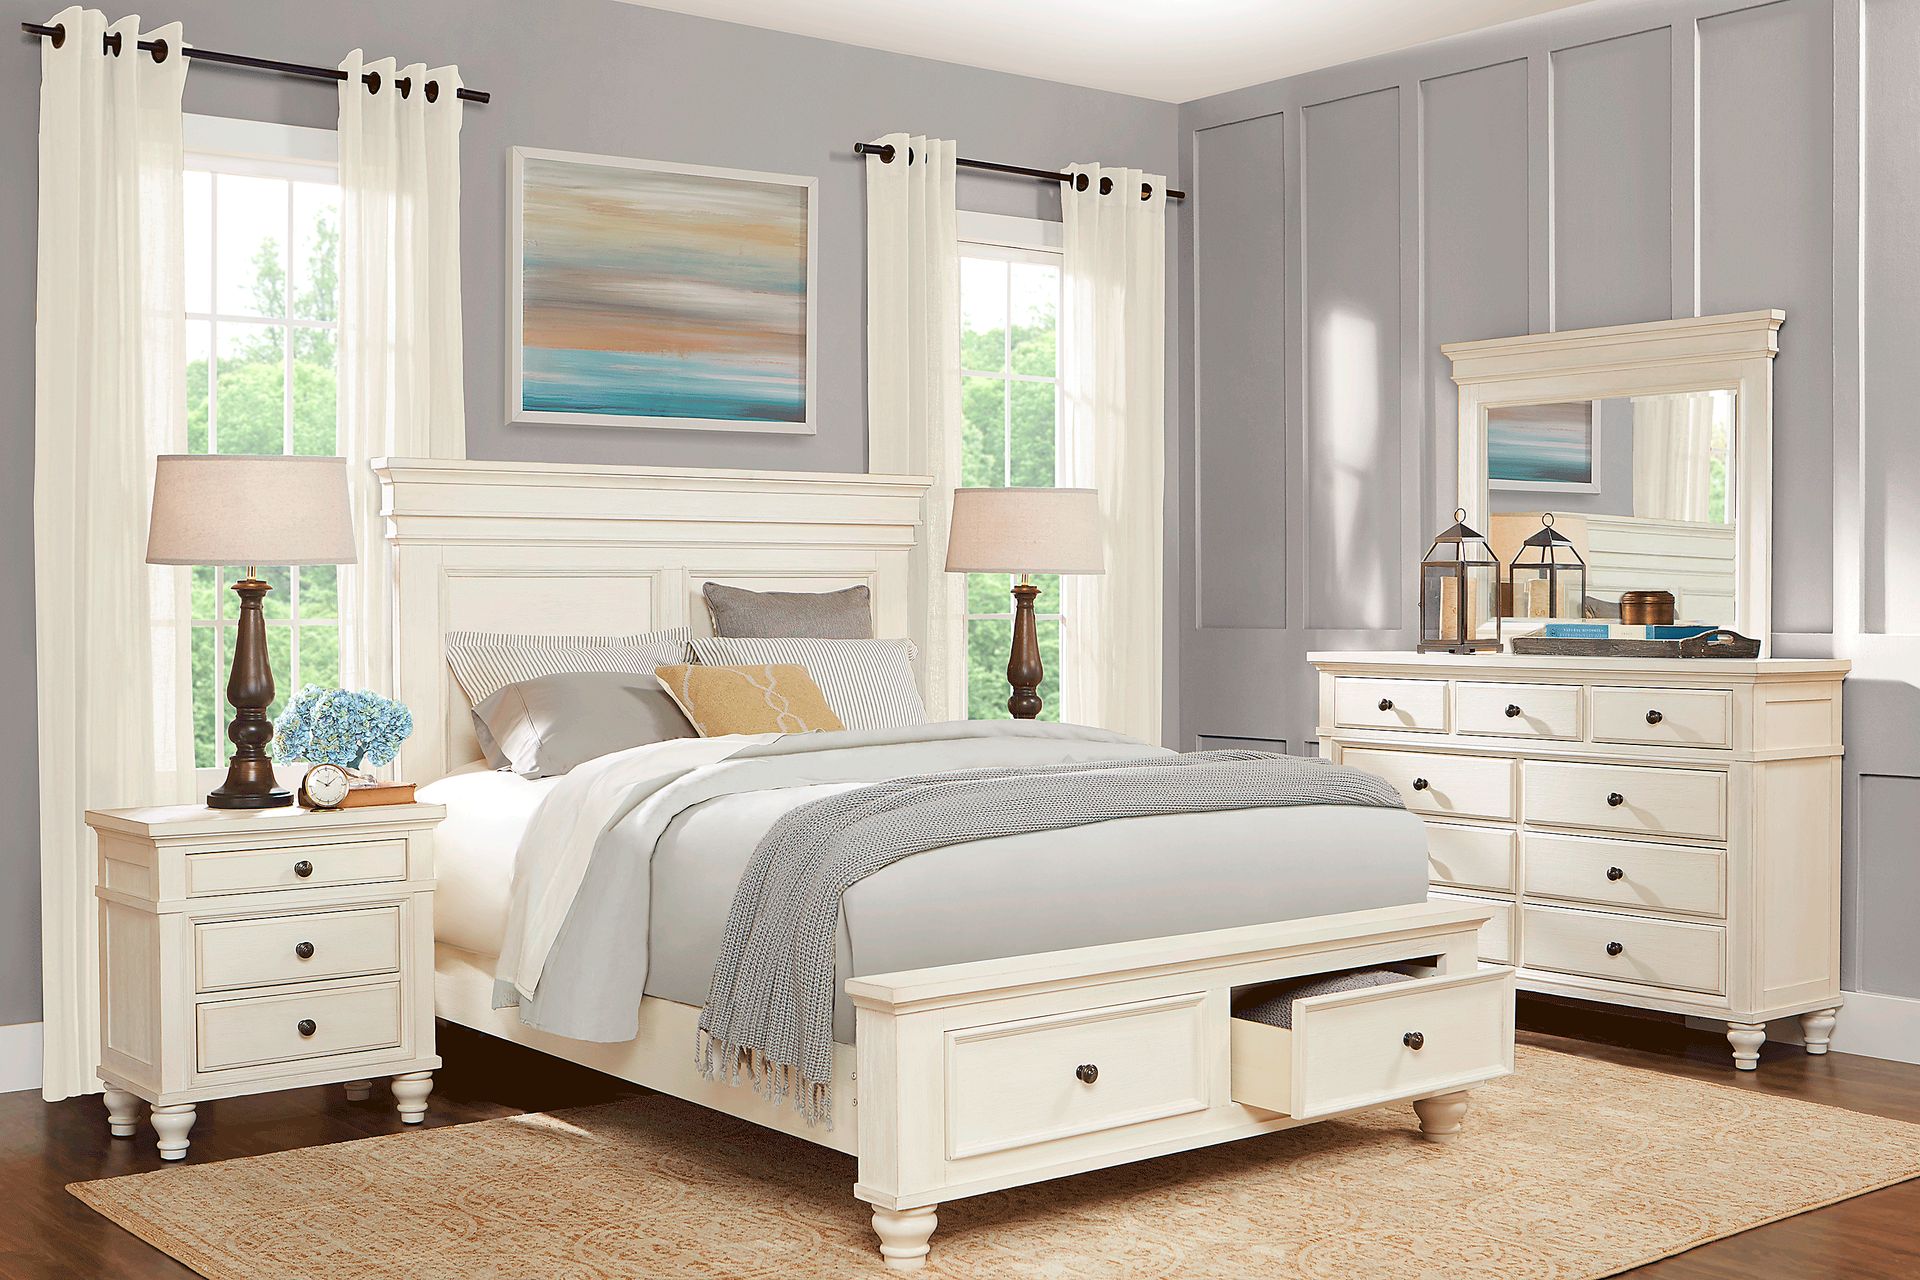 Lake Town 7 Pc Off-White Light Wood,White King Bedroom Set With 